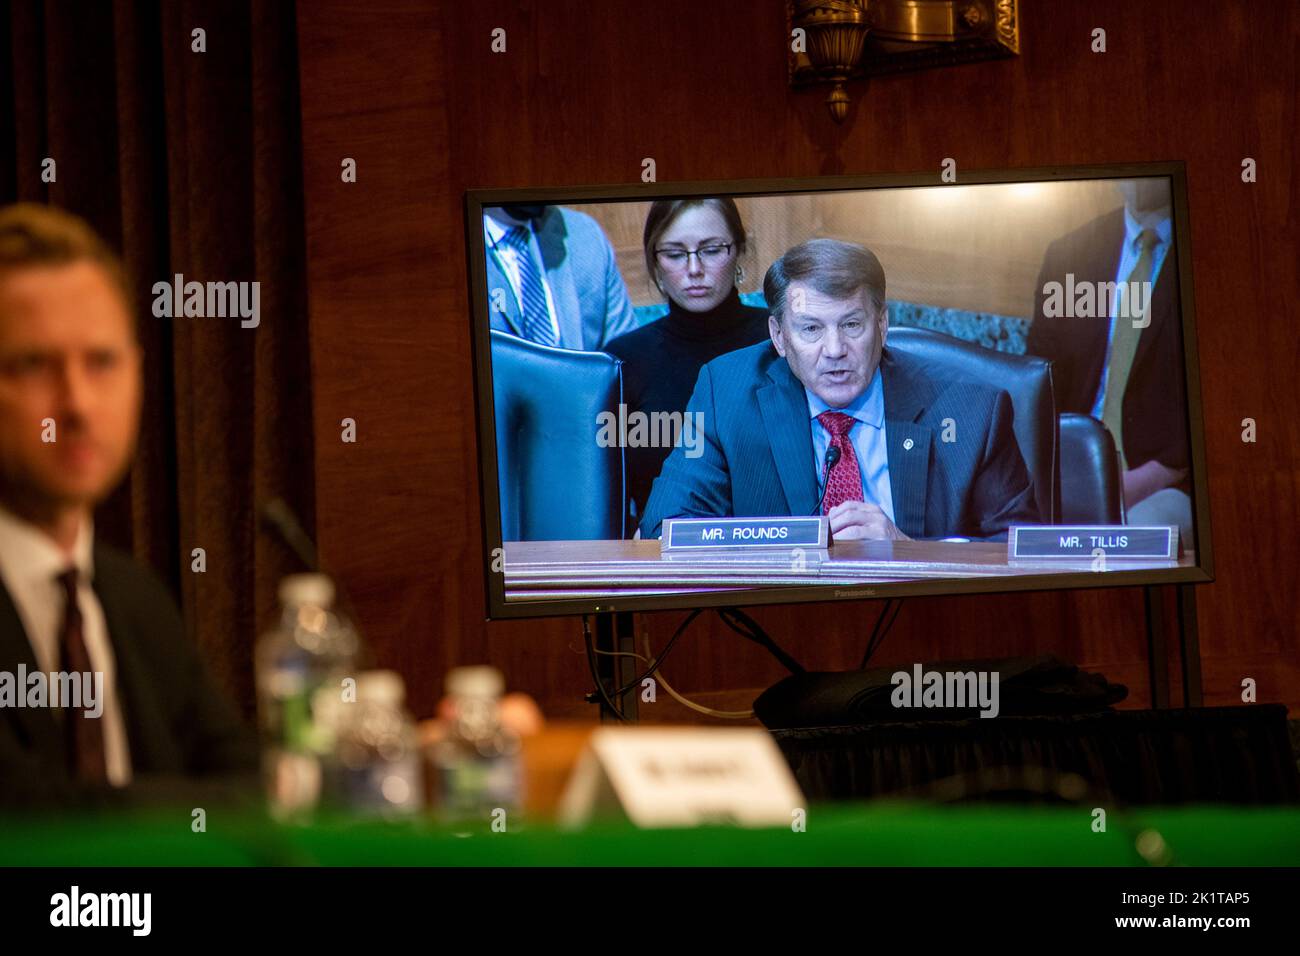 Washington, United States Of America. 20th Sep, 2022. United States Senator Mike Rounds (Republican of South Dakota) questions Andrew C. Adams, Director, Task Force KleptoCapture, United States Department of Justice, during a Senate Committee on Banking, Housing, and Urban Affairs hearing to examine tightening the screws on Russia, focusing on smart sanctions, economic statecraft and next steps, in the Dirksen Senate Office Building in Washington, DC, Tuesday, September 20, 2022. Credit: Rod Lamkey/CNP/Sipa USA Credit: Sipa USA/Alamy Live News Stock Photo